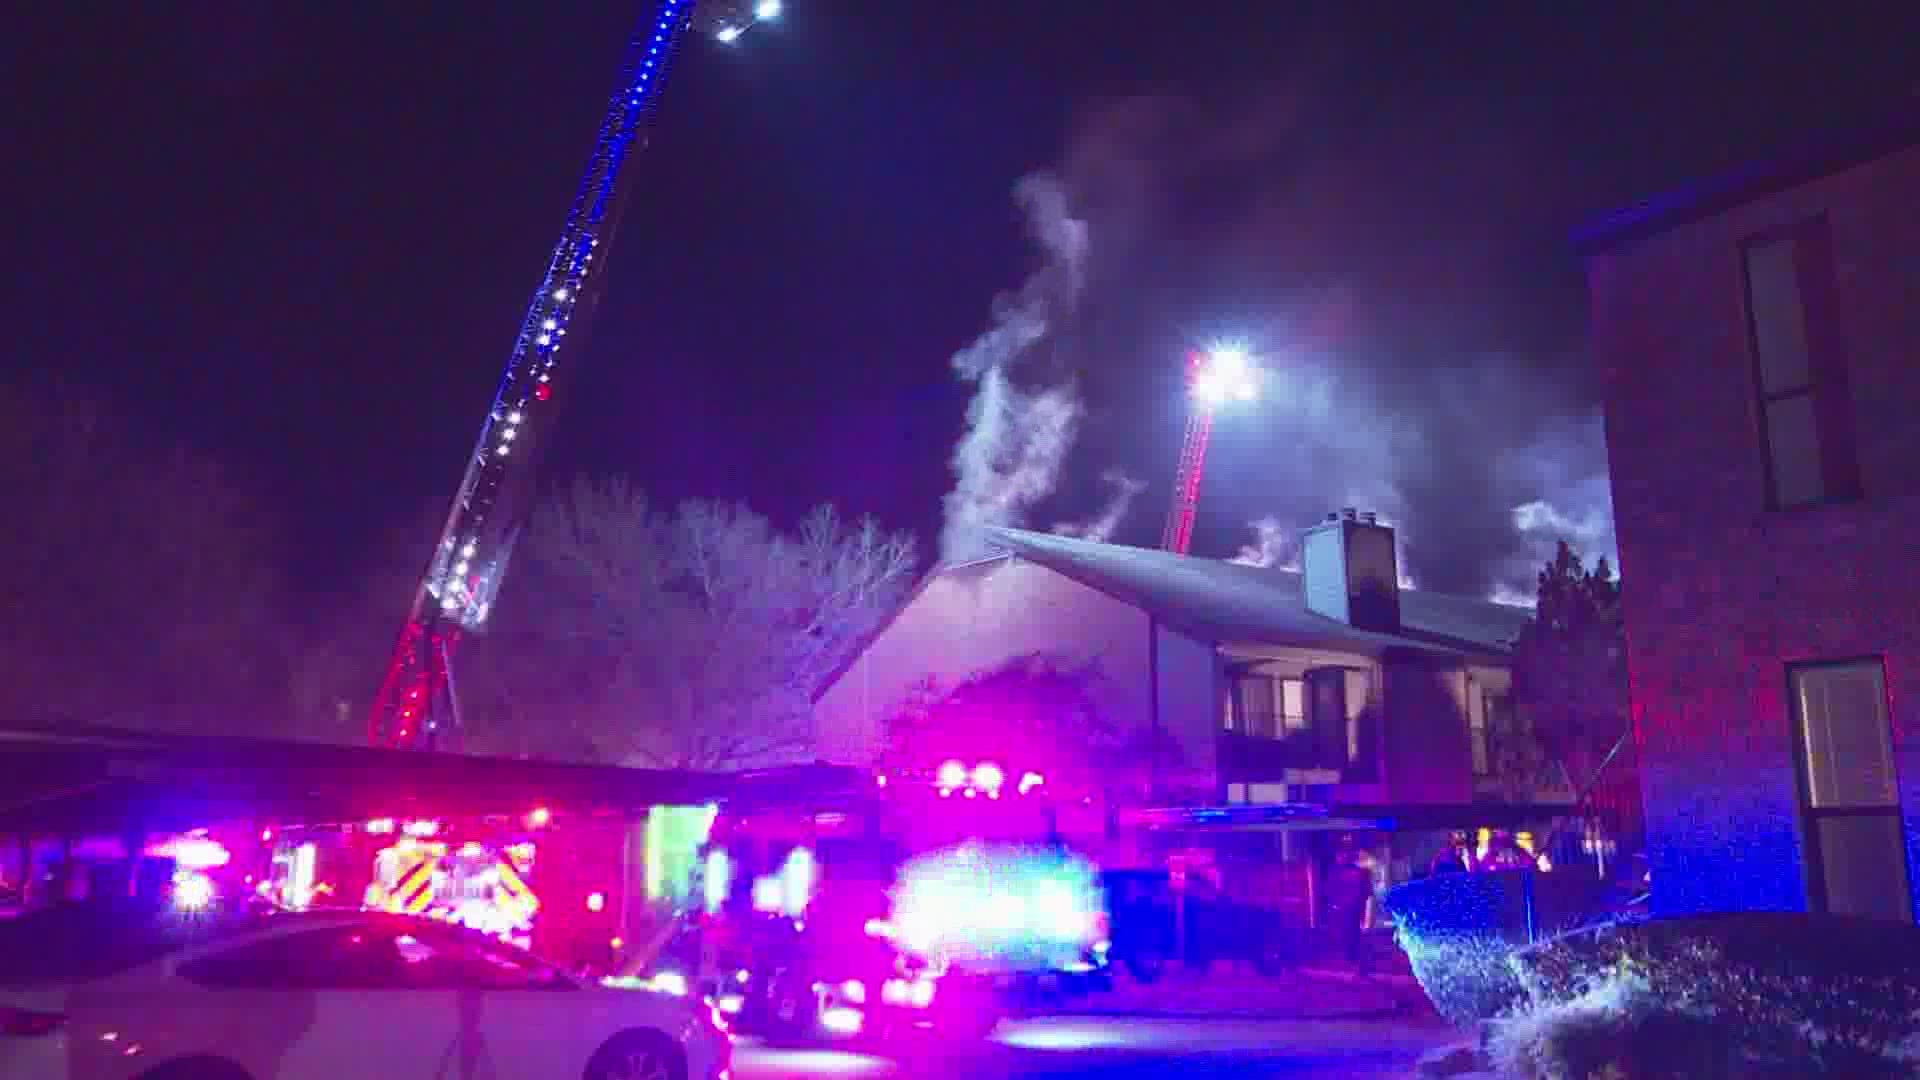 Nearly 30 residents lost their homes Friday night after an apartment fire in north Harris County. The cause of the fire was due to improperly discarded charcoal.